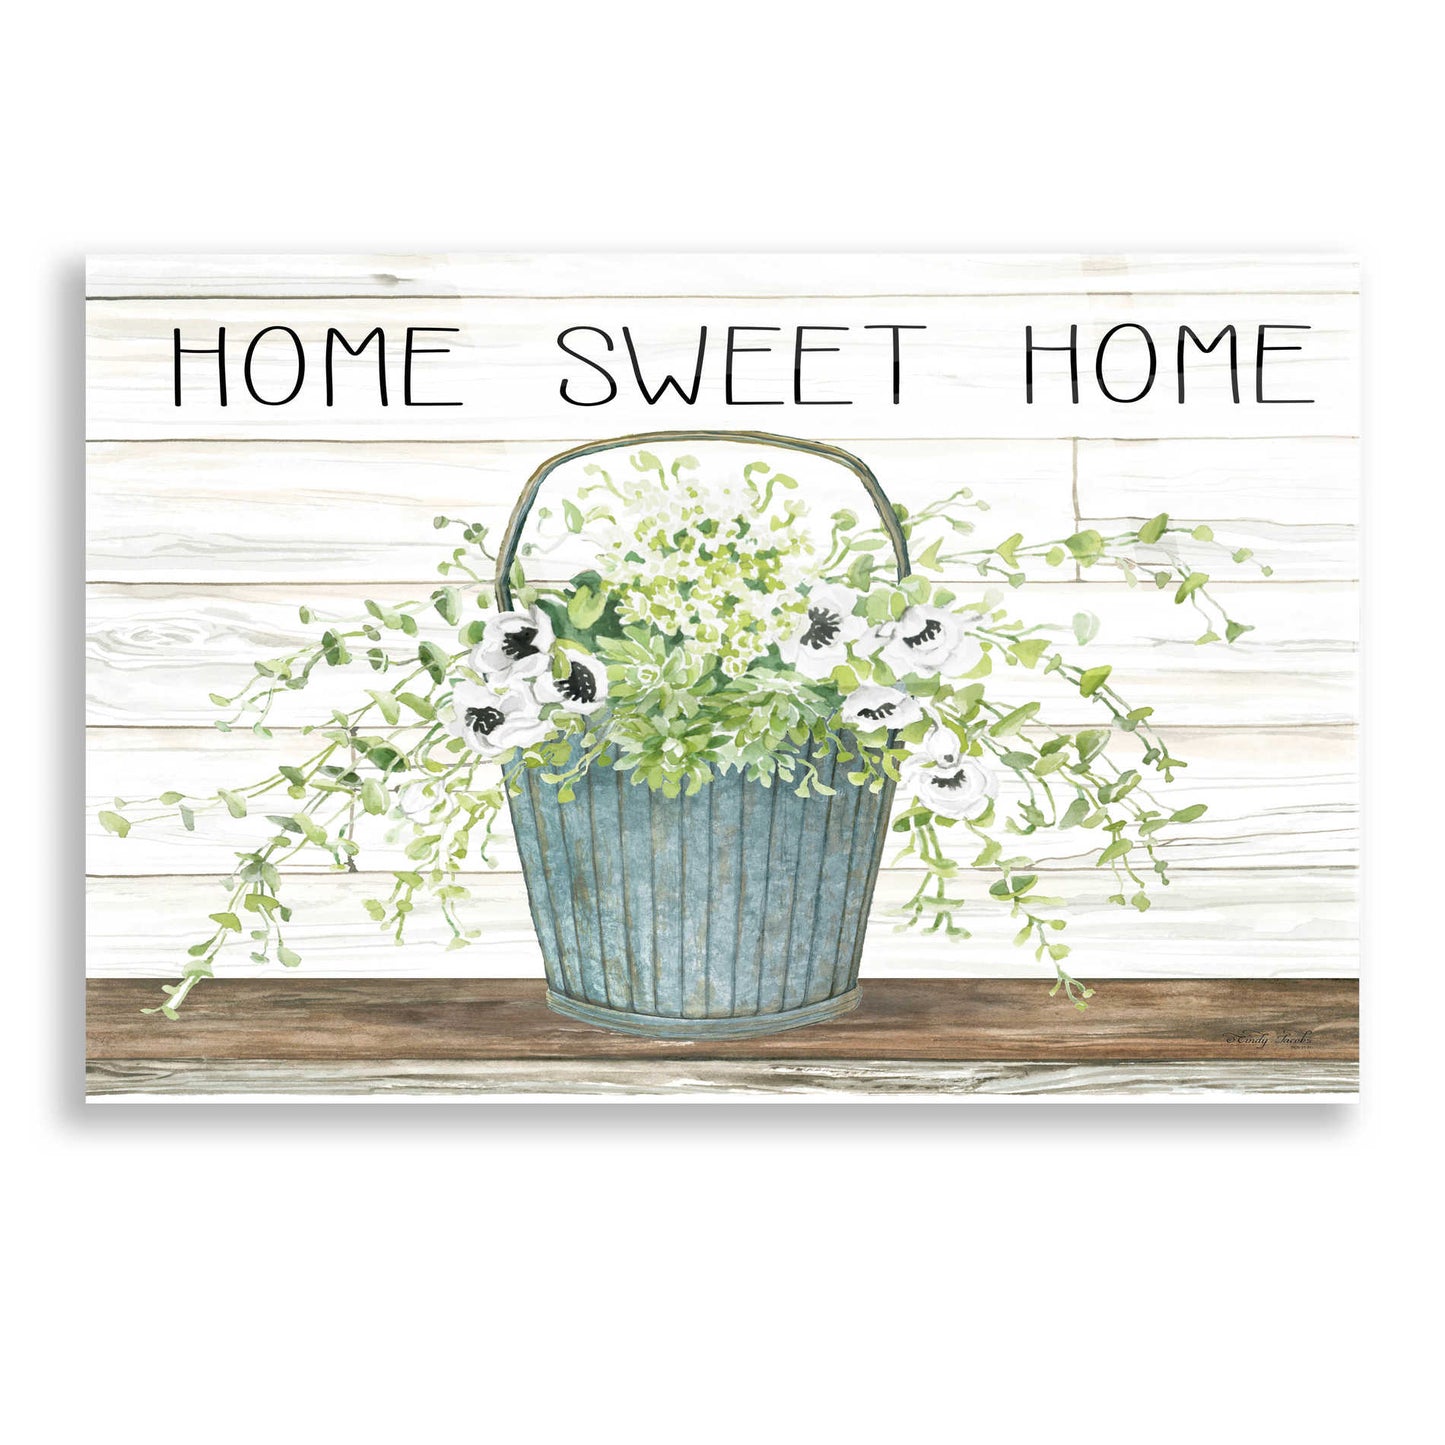 Epic Art 'Home Sweet Home Galvanized Bucket' by Cindy Jacobs, Acrylic Glass Wall Art,16x12